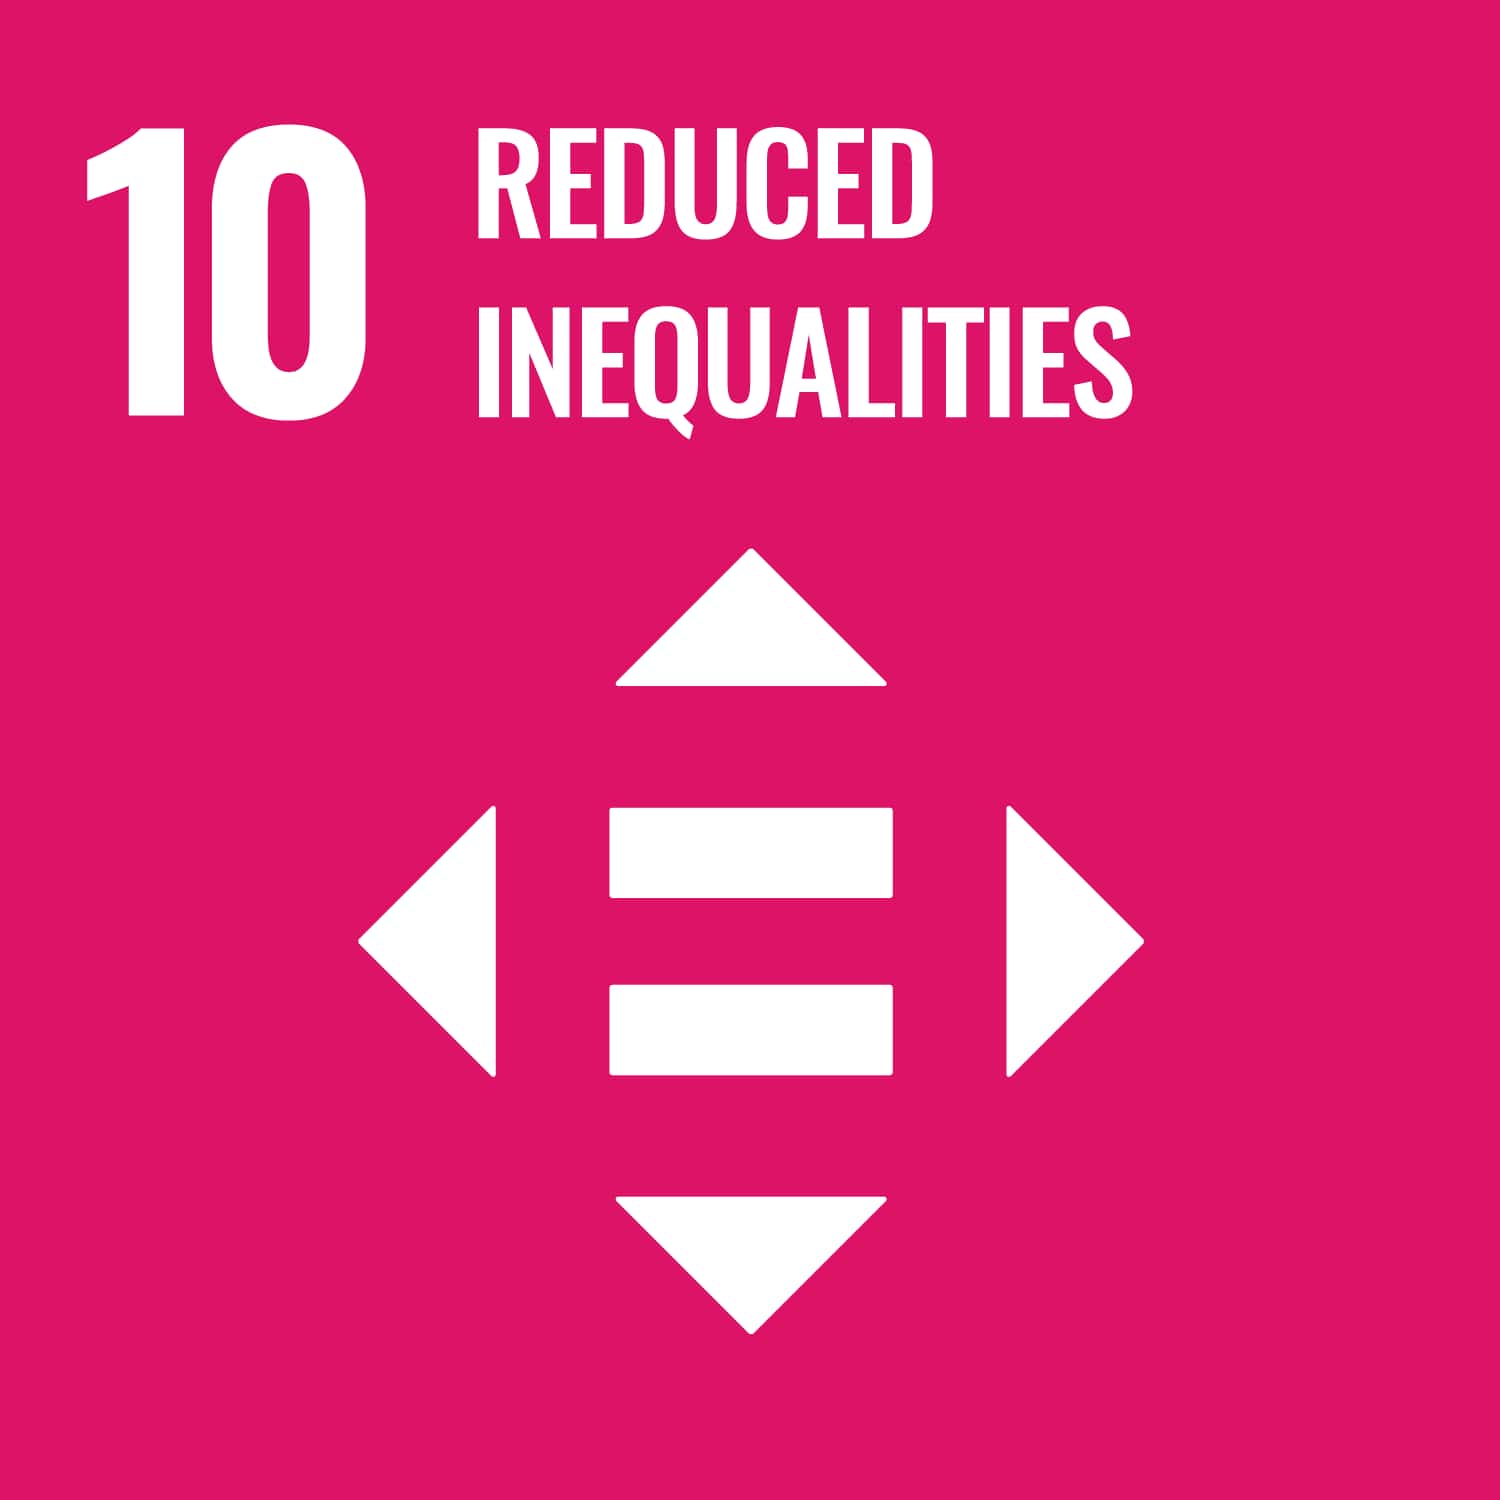 The logo for United Nations Sustainable Development Goal (SDG) 10: Reduced Inequalities